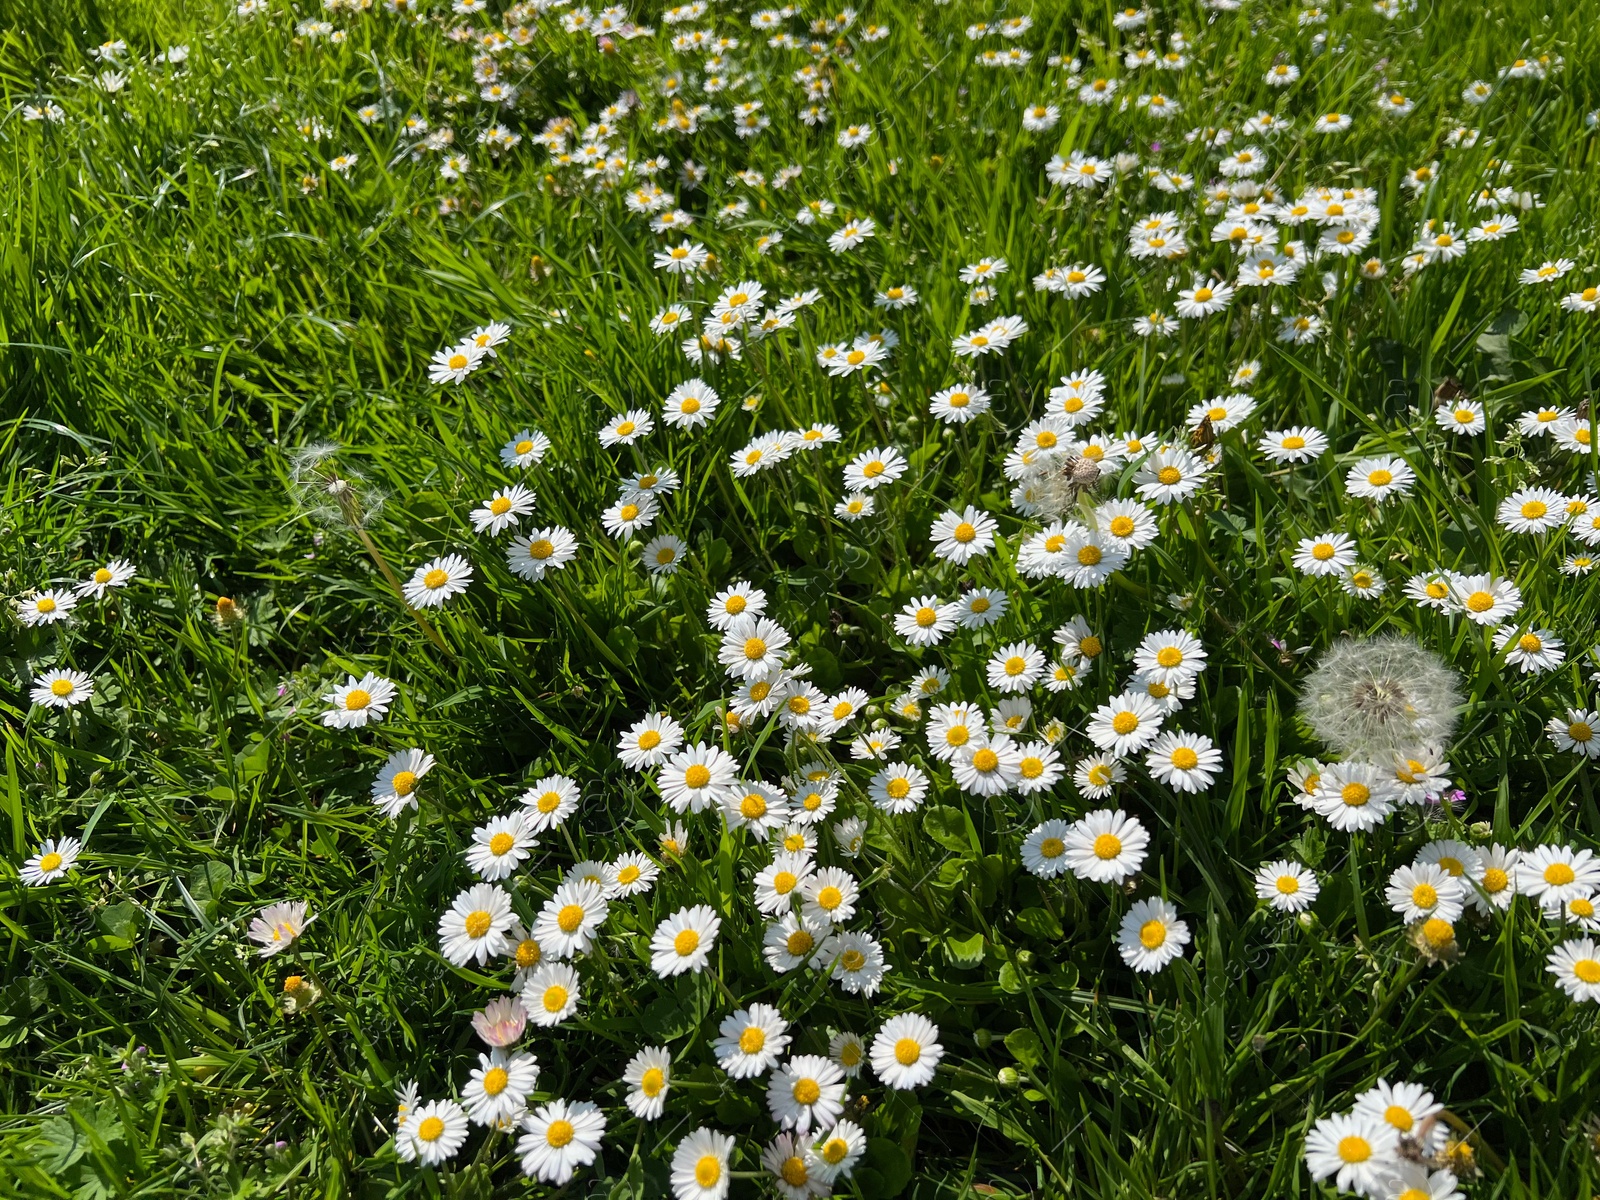 Photo of Beautiful white daisy flowers, dandelions and green grass growing outdoors